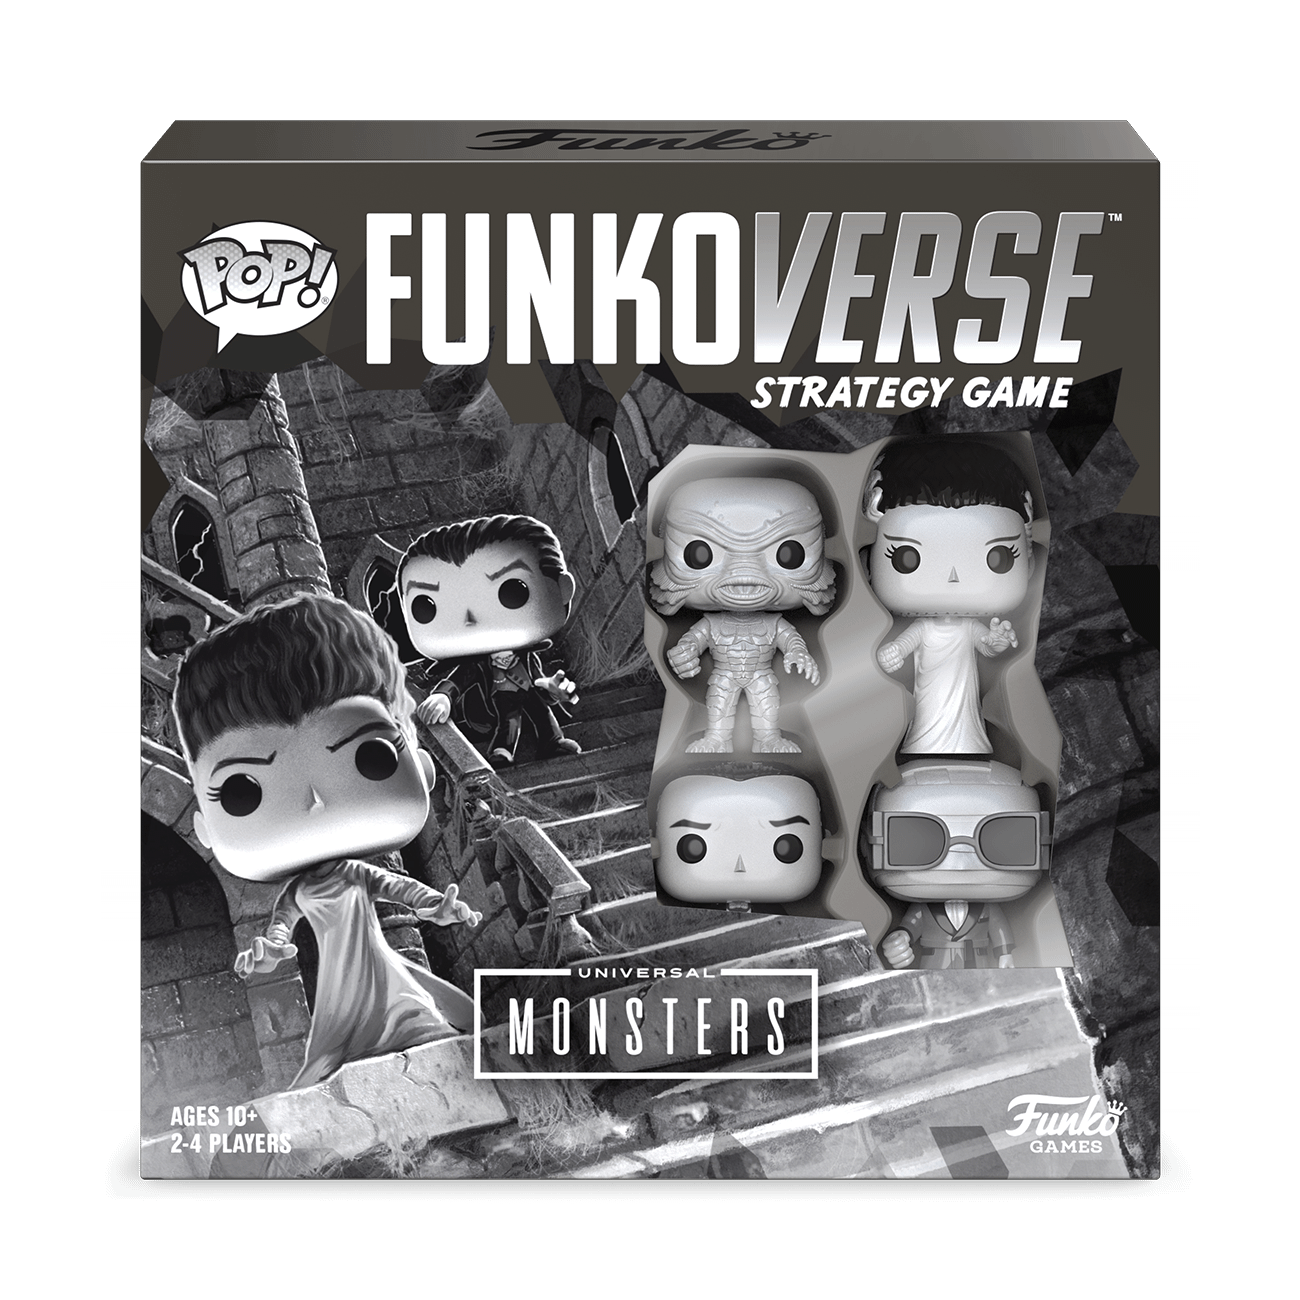 Universal Monsters - Funkoverse